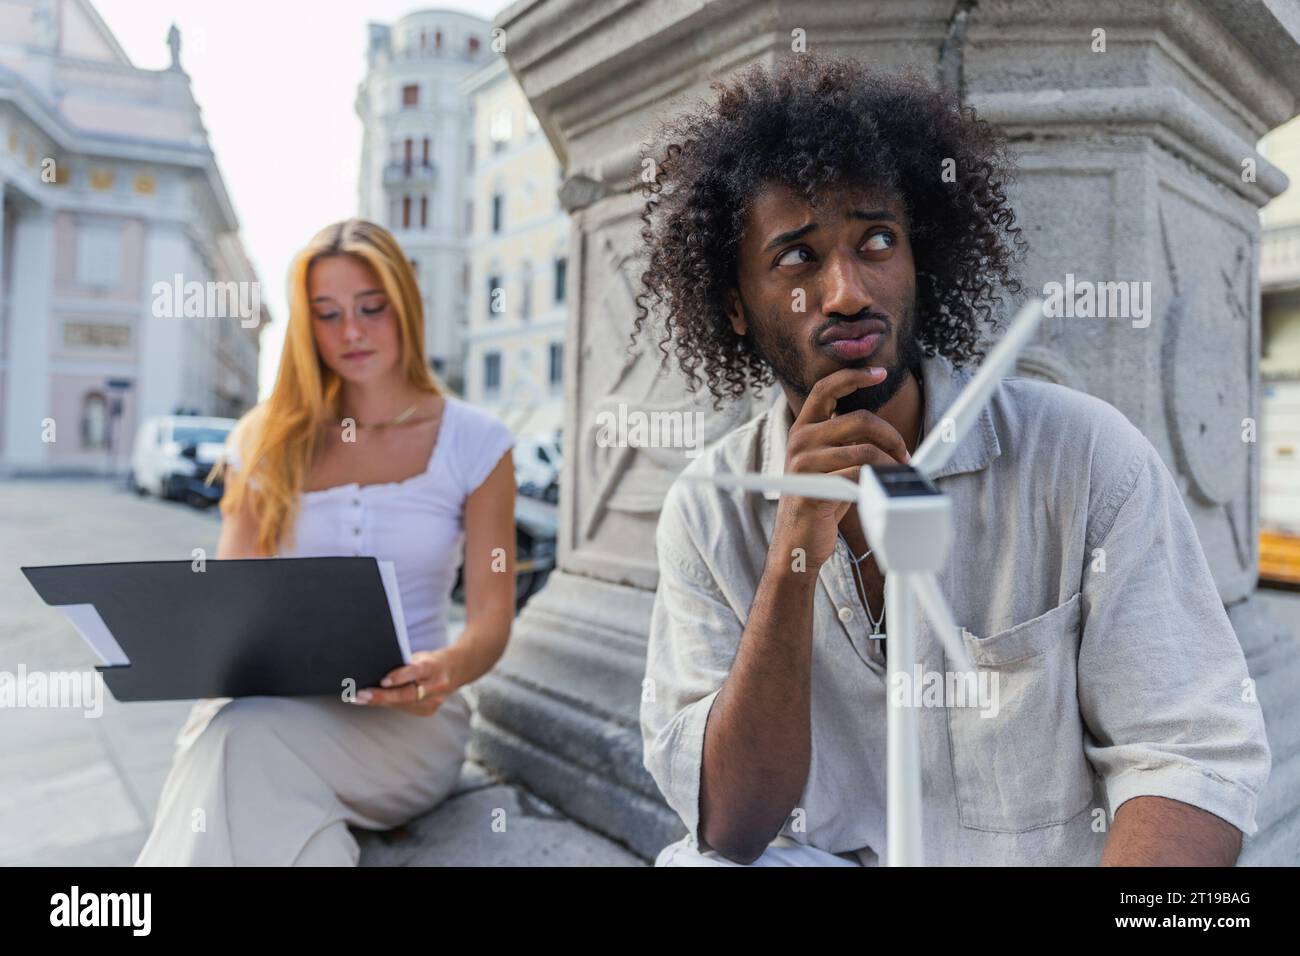 An engineering student is thoughtful as he holds a small wind turbine and his friend goes over her notes Stock Photo